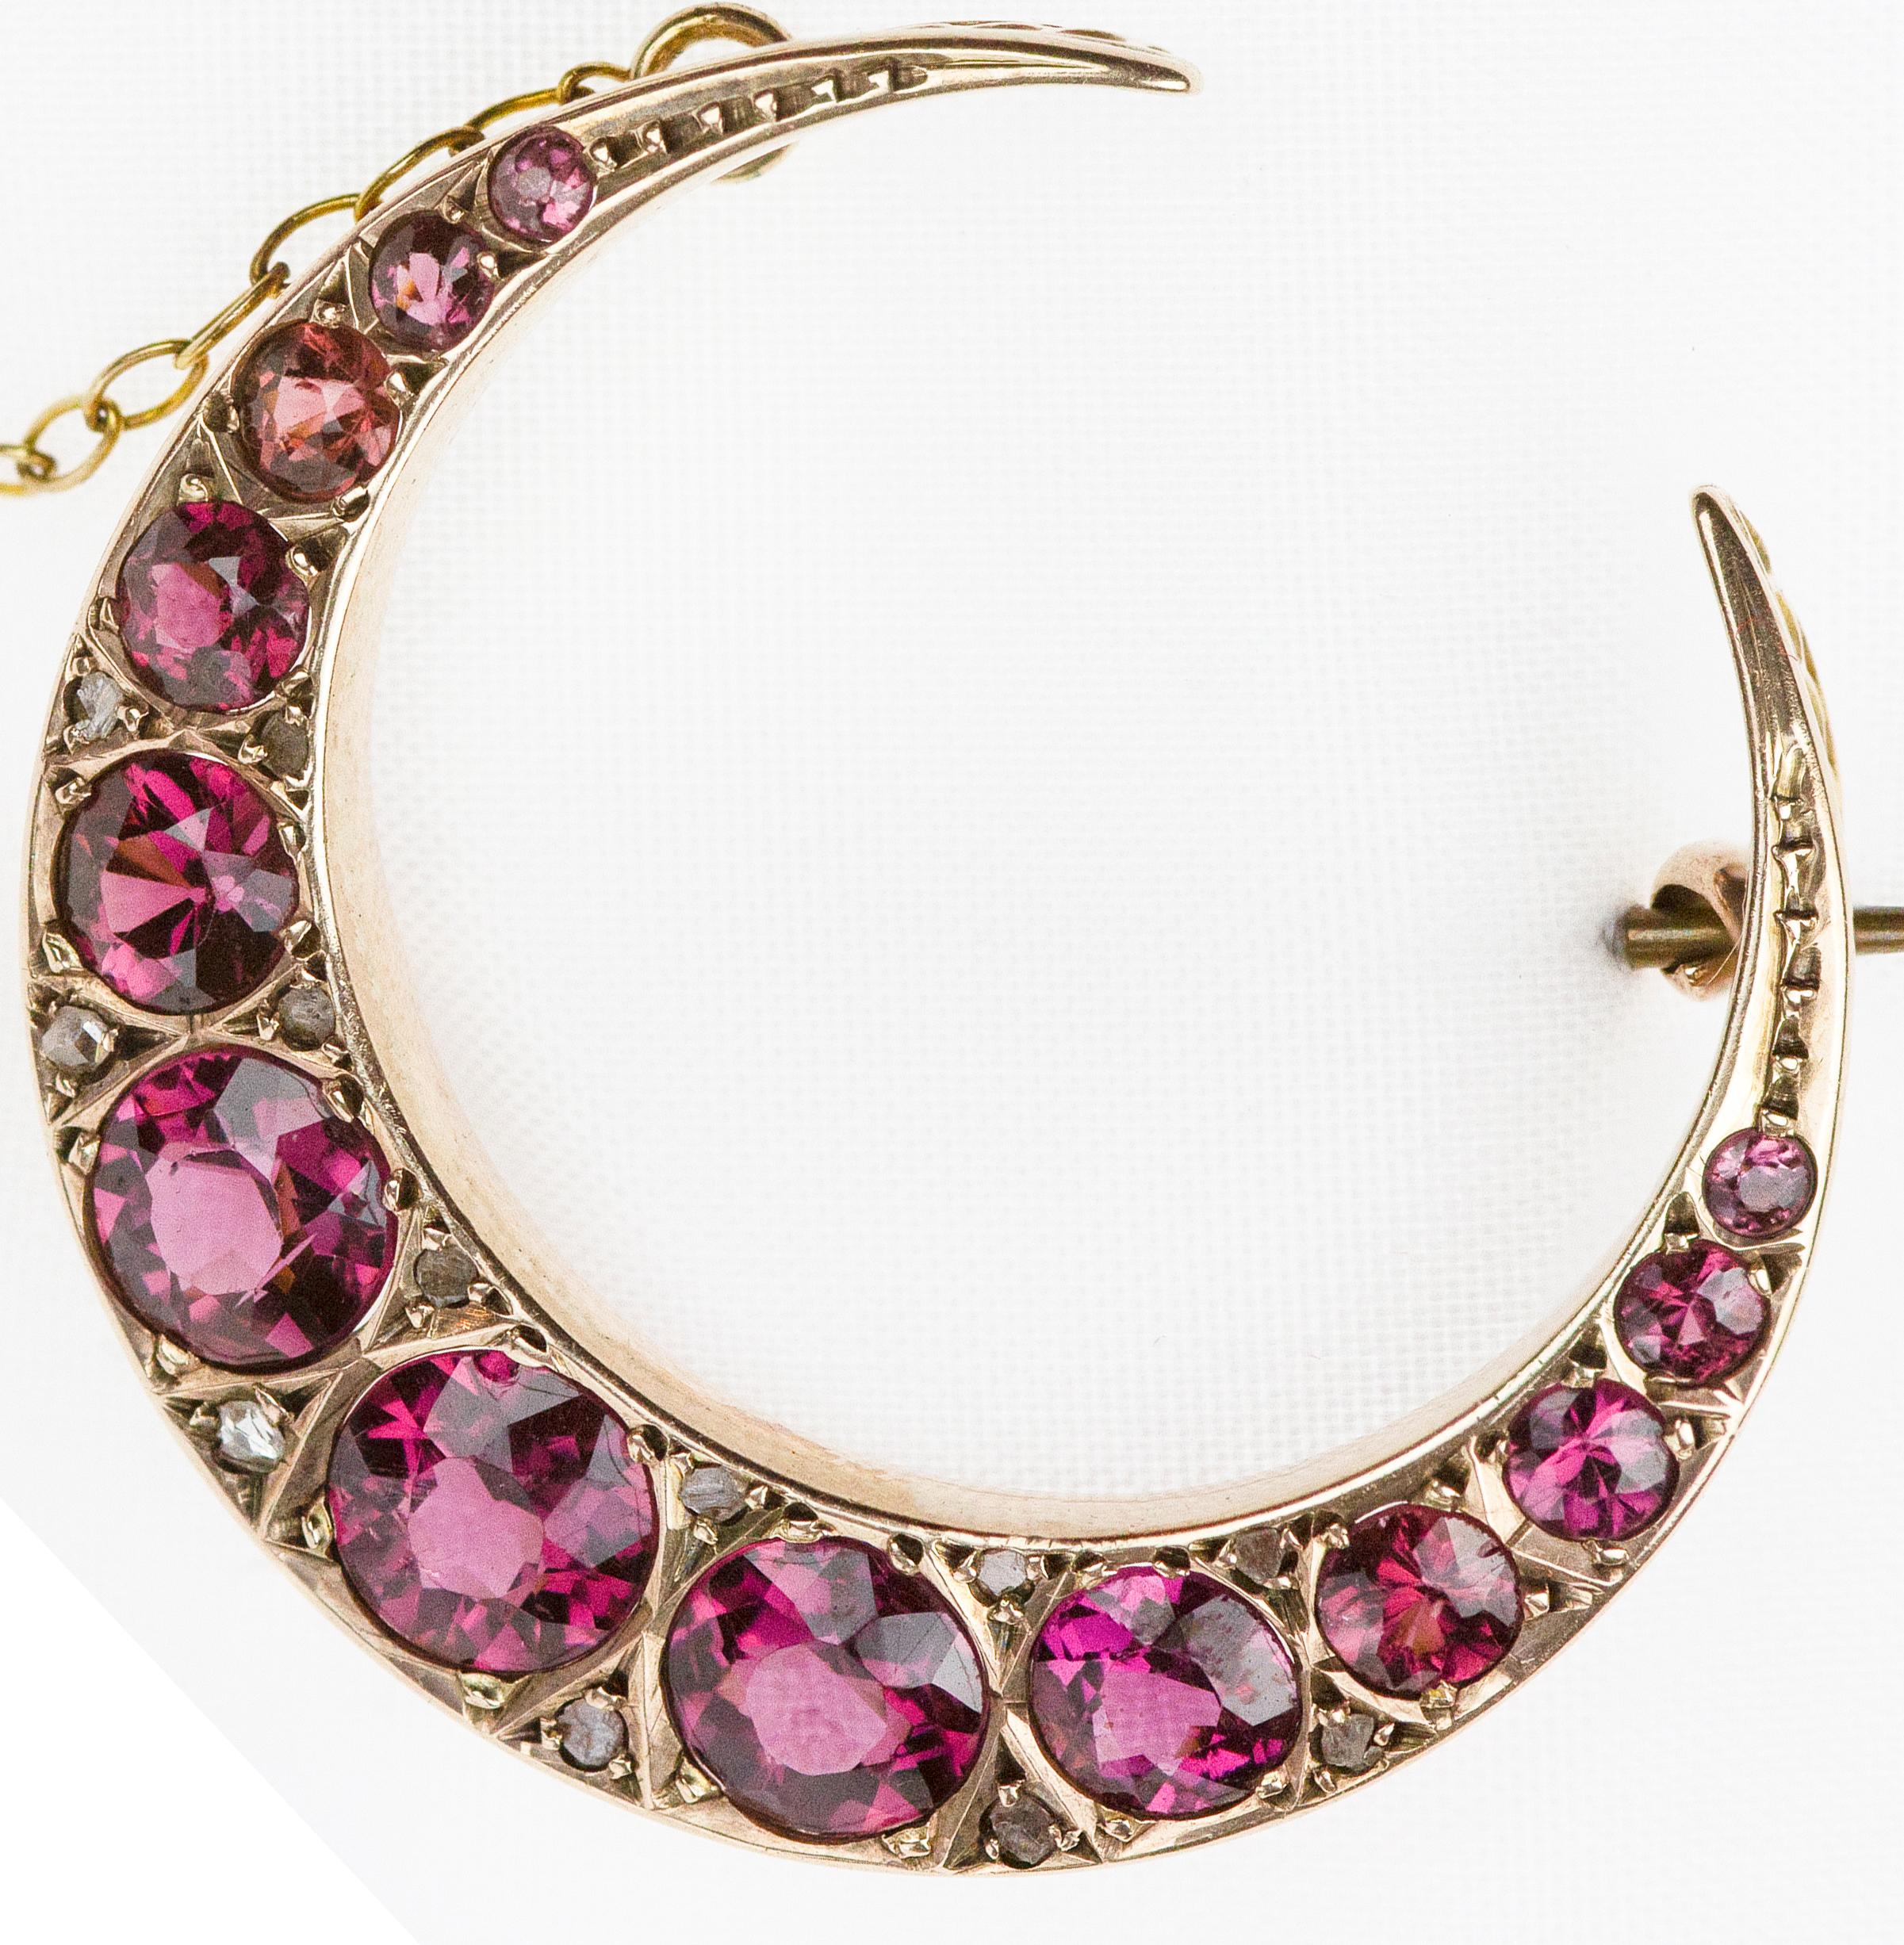 Gorgeous, this crescent moon brooch-made with 9 ct gold hallmarked UK Chester 1909, garnet and diamond is a fantastic accessory to any piece of clothing and can make a divine gift to someone special. 
On the brooch is several garnet circular gems,